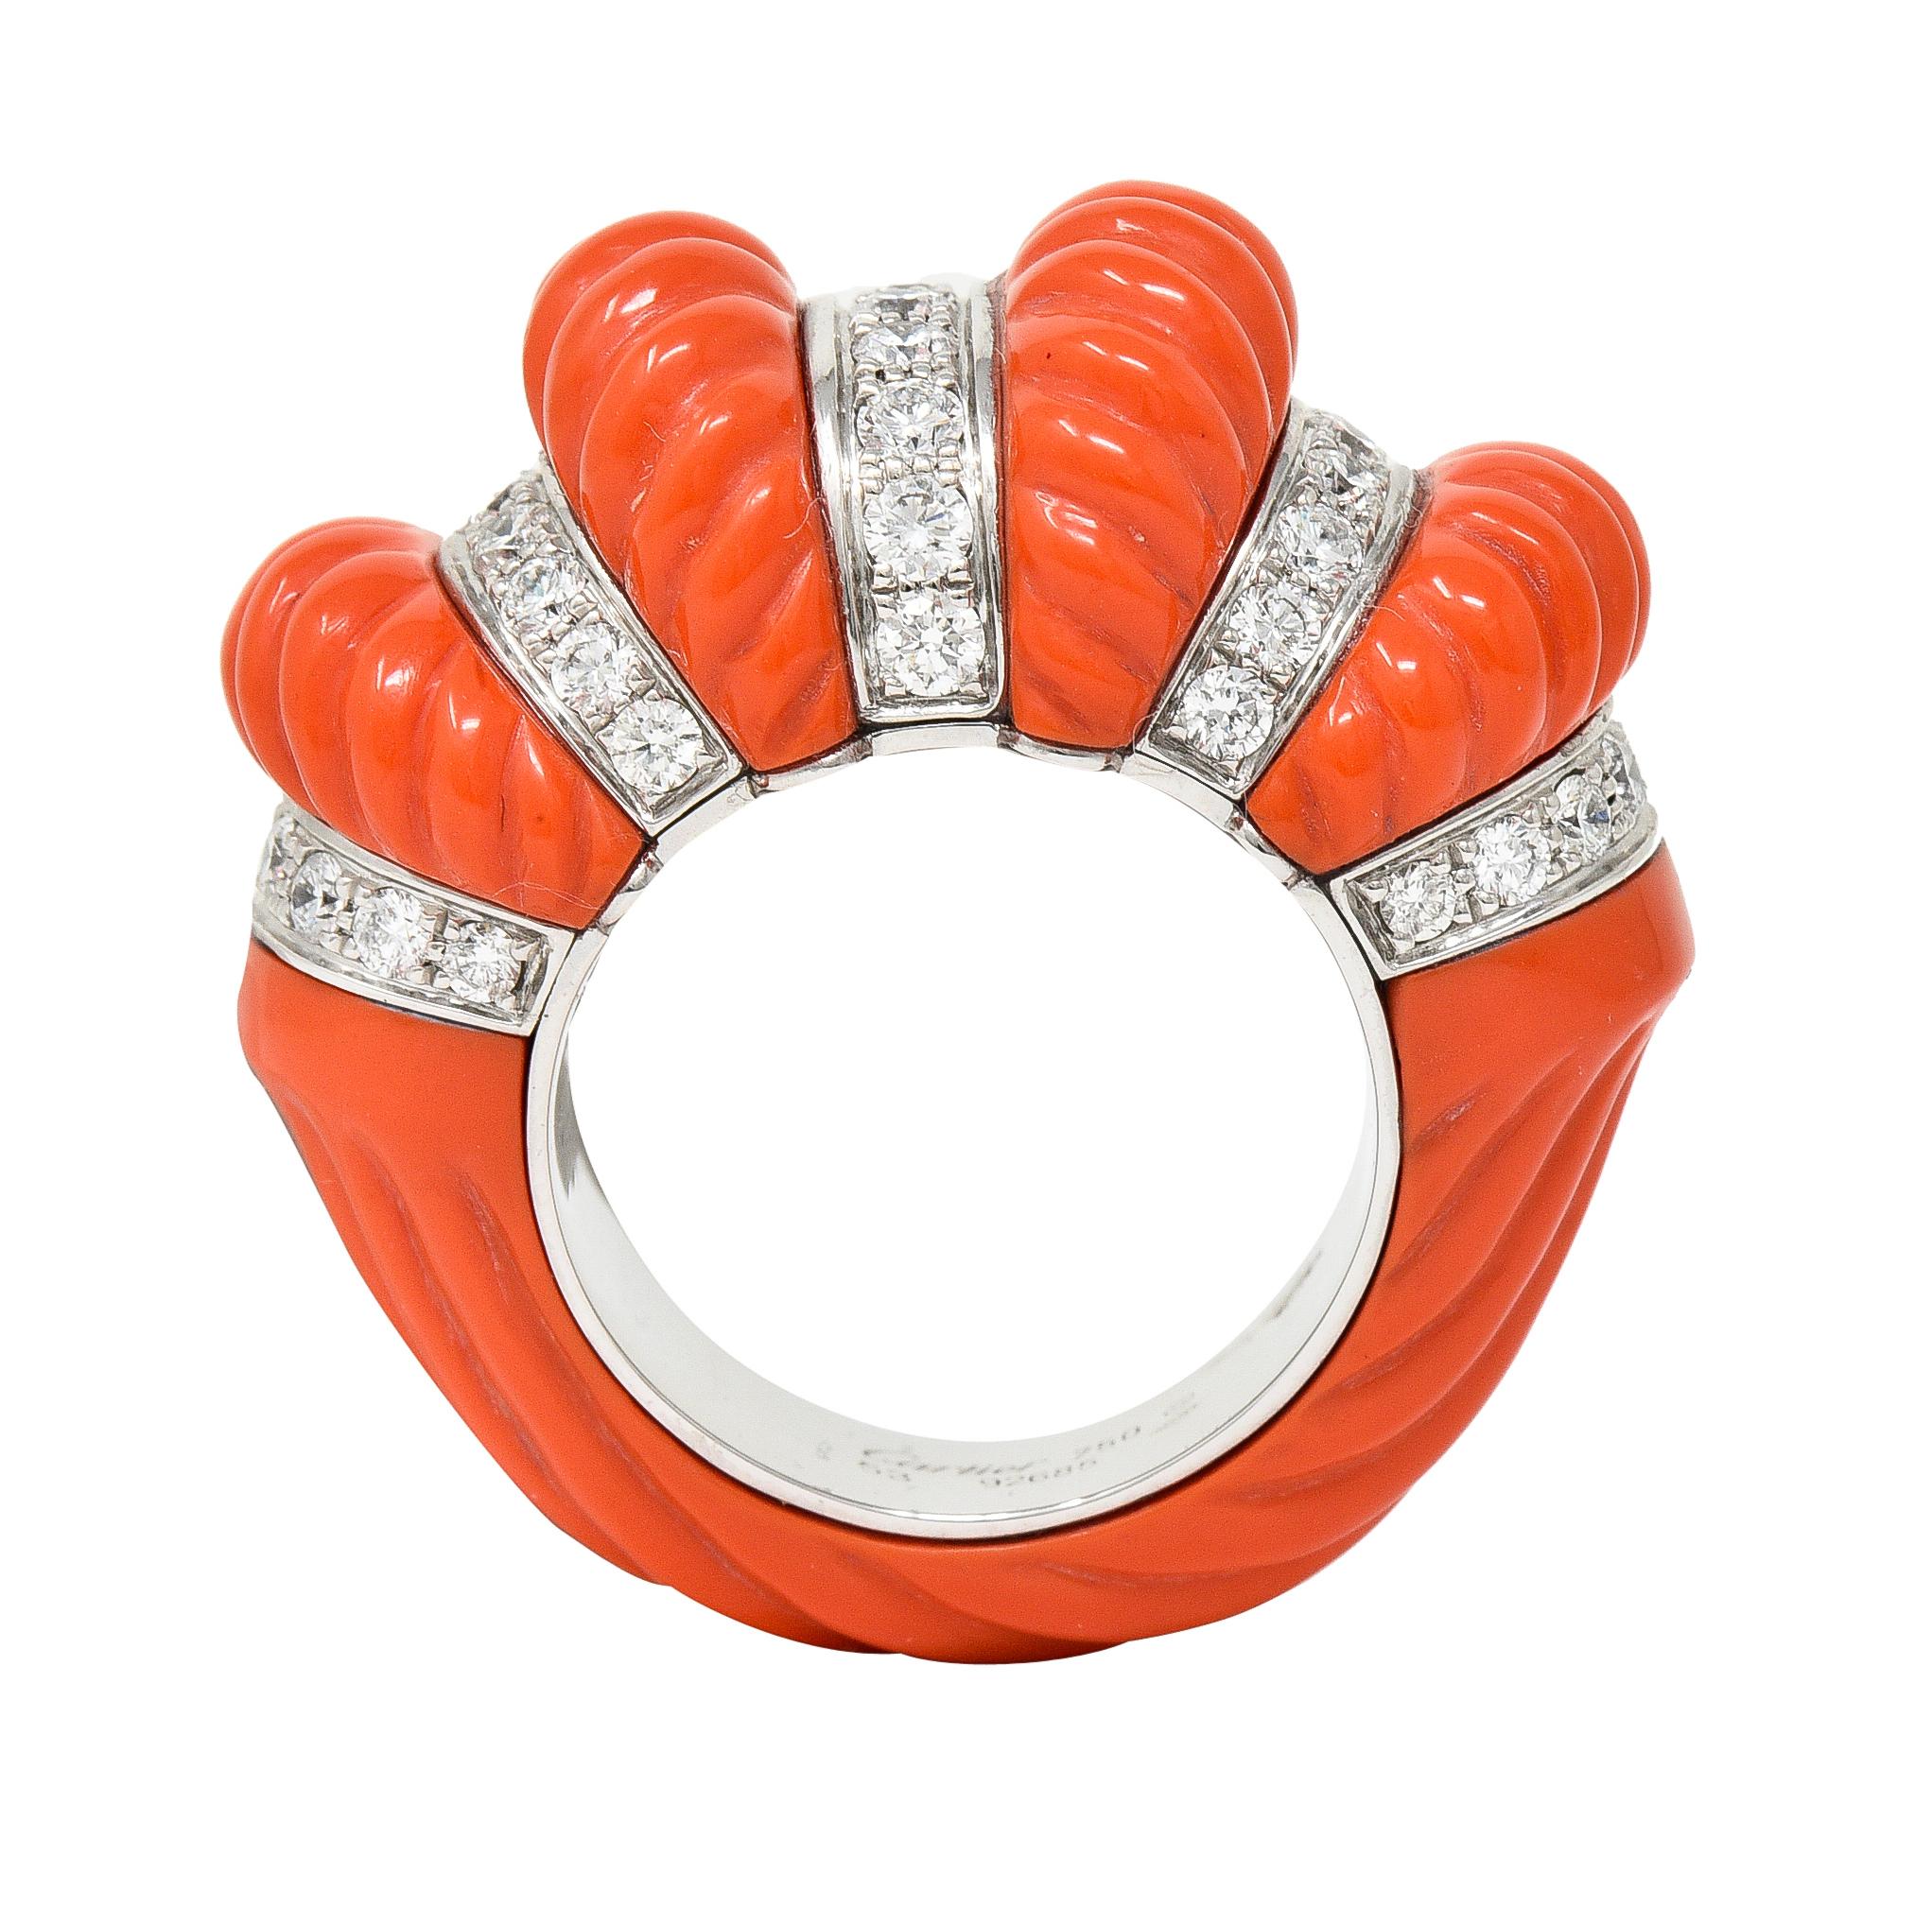 Designed as a domed form comprised of alternating segments of coral and round brilliant cut diamonds 
Coral is carved with fluted pattern - opaque medium reddish-orange in color
Diamonds are bead set in rows and weigh approximately 1.93 carats